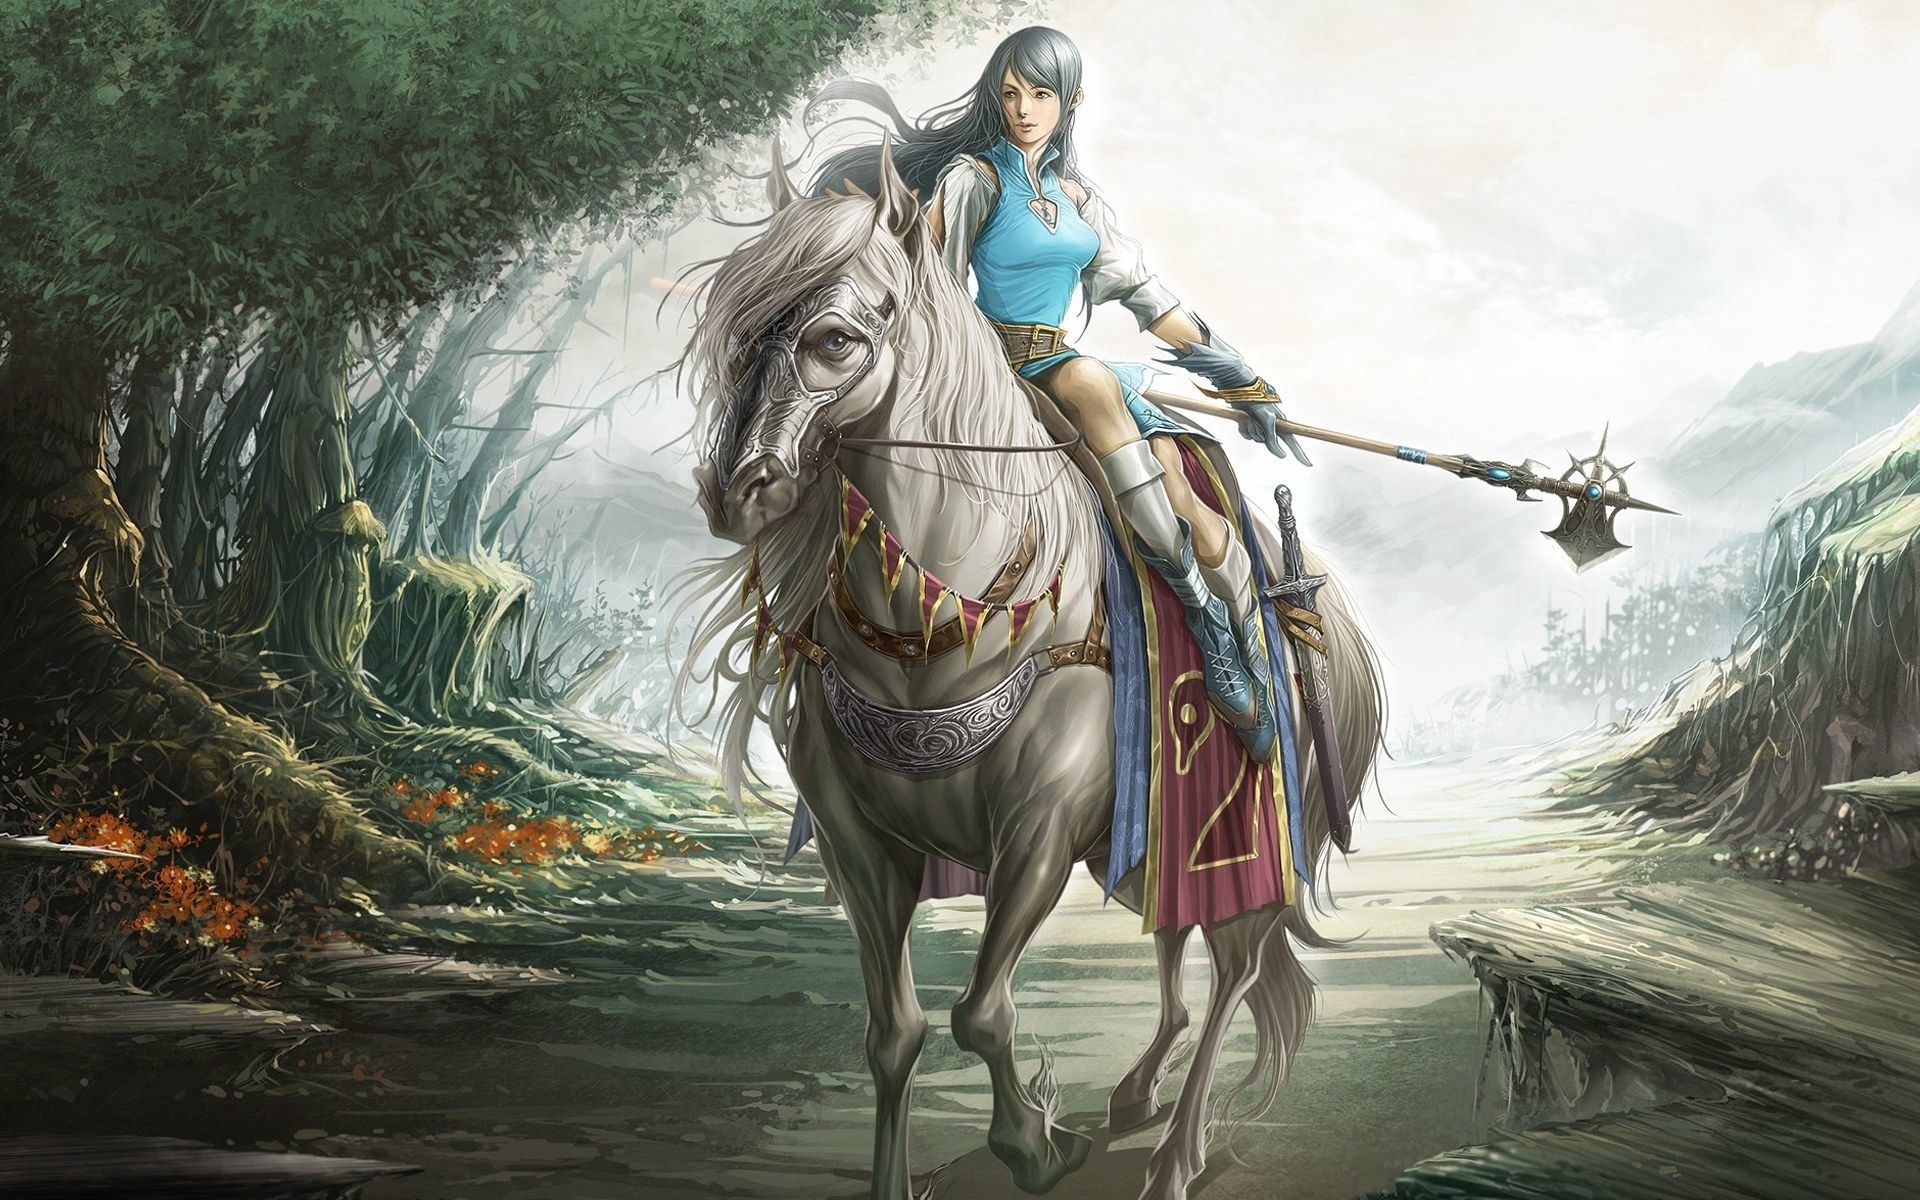 134761 Screensavers and Wallpapers Warrior for phone. Download trees, fantasy, weapon, road, girl, warrior, horse pictures for free